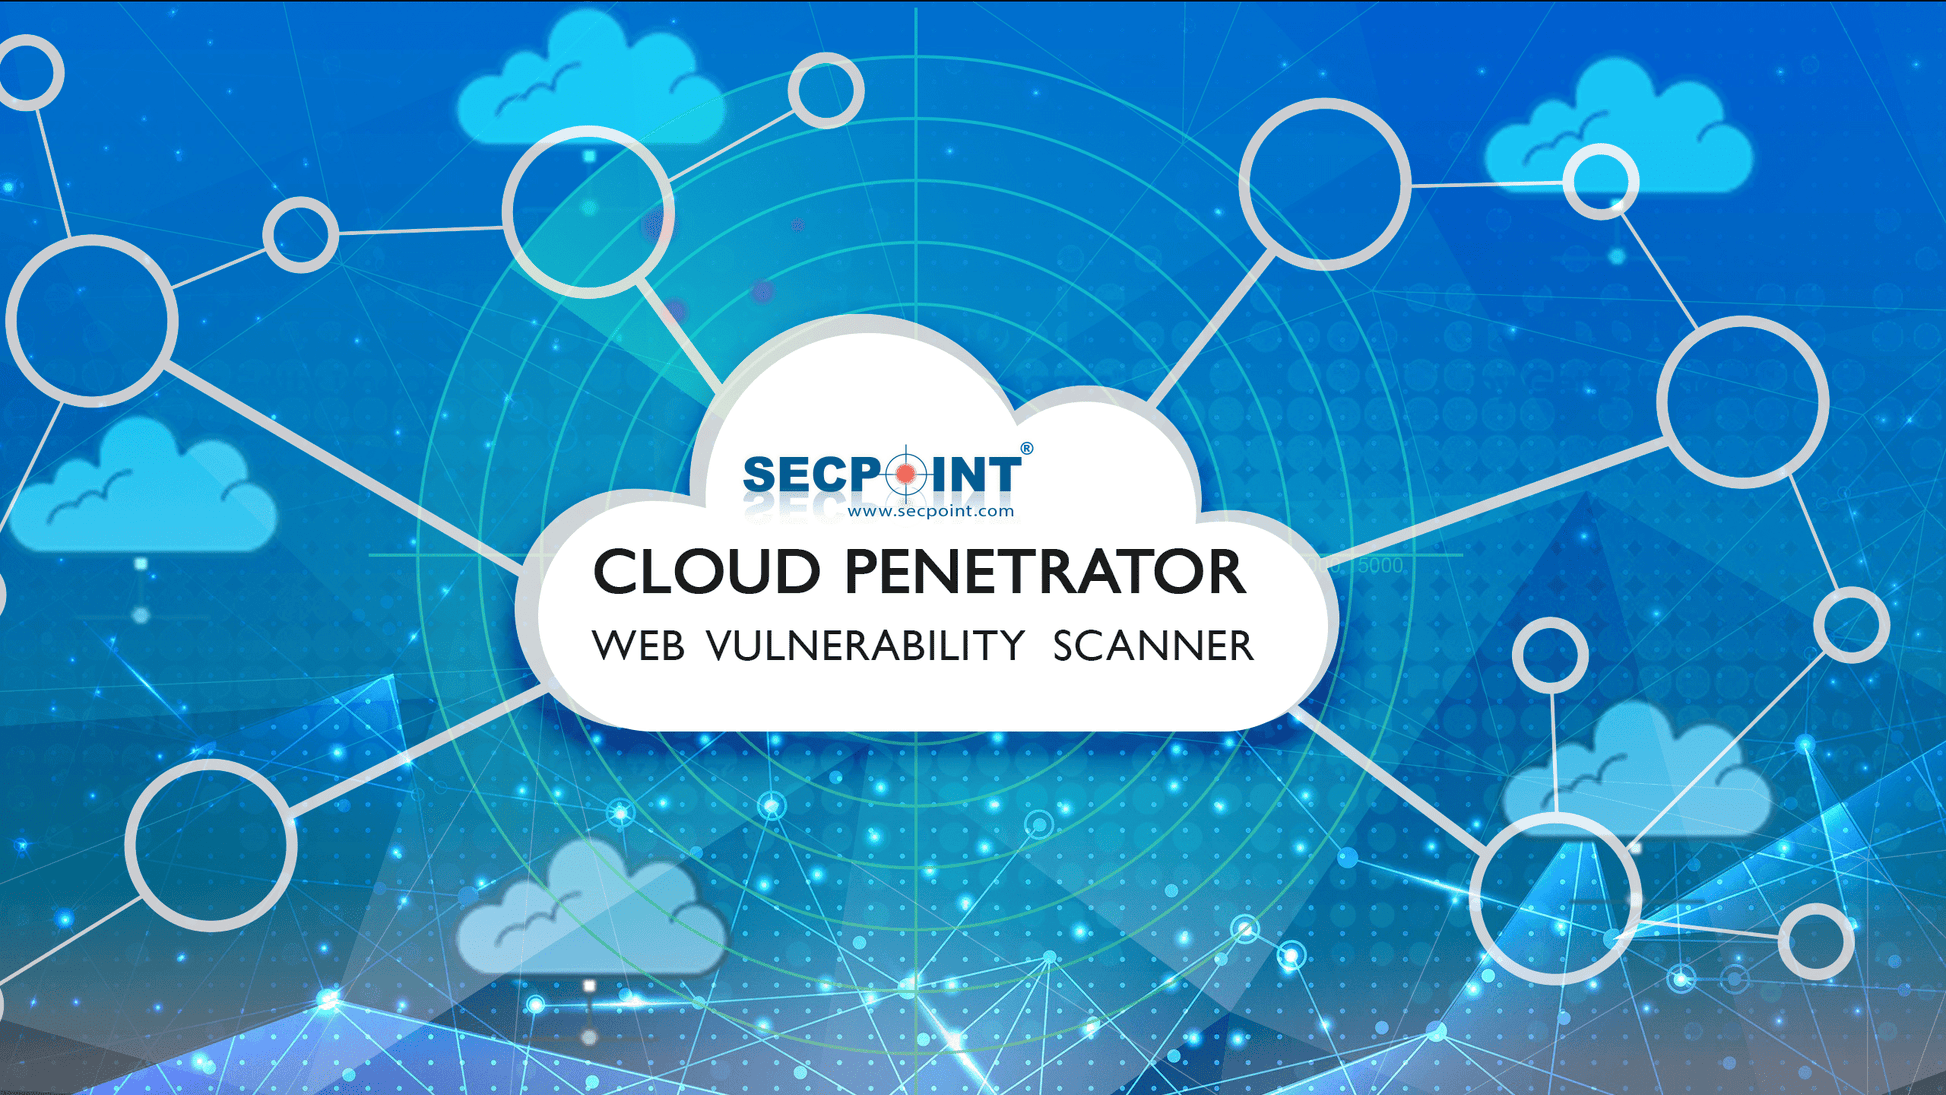 SecPoint Cloud Penetrator S9 - Vulnerability Scanning of 32 IPs  for 1 Year Static Scan License - SecPoint